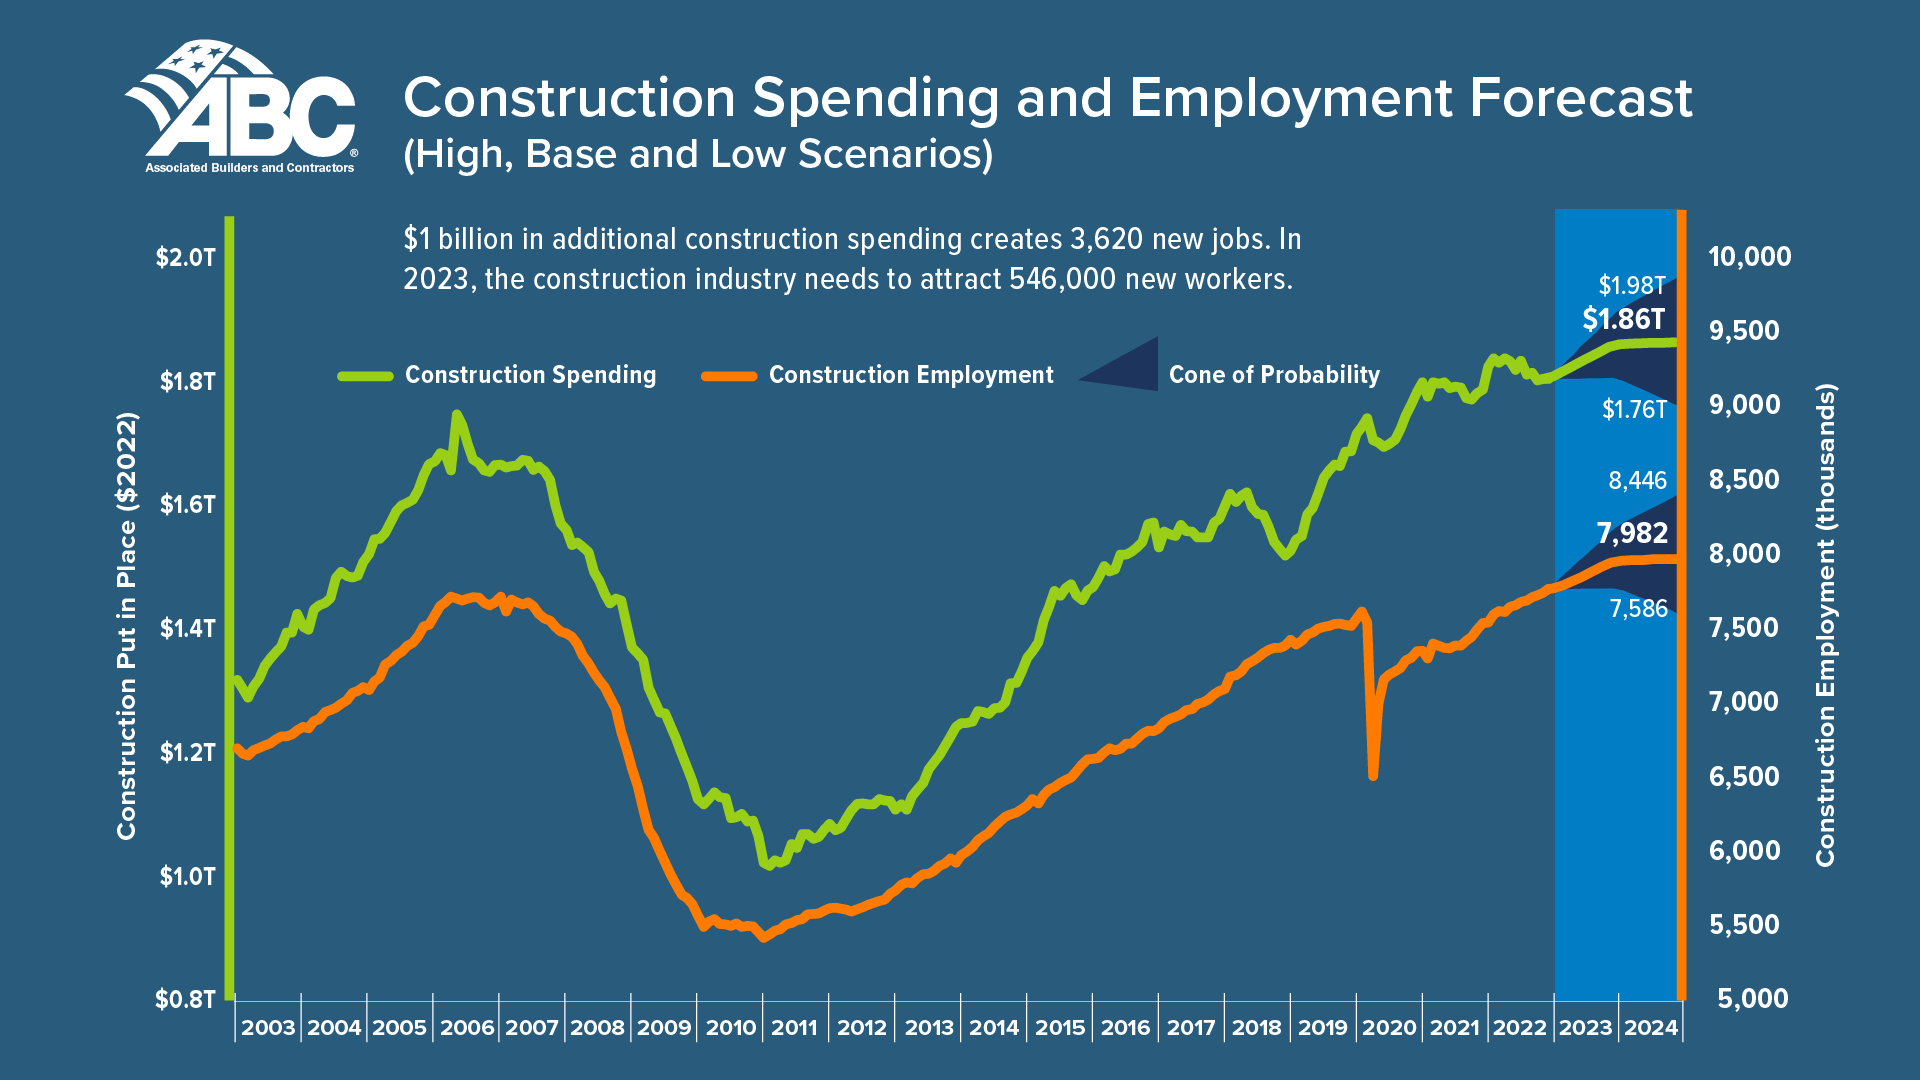 Construction Spending and Employment Forecast 2023 chart